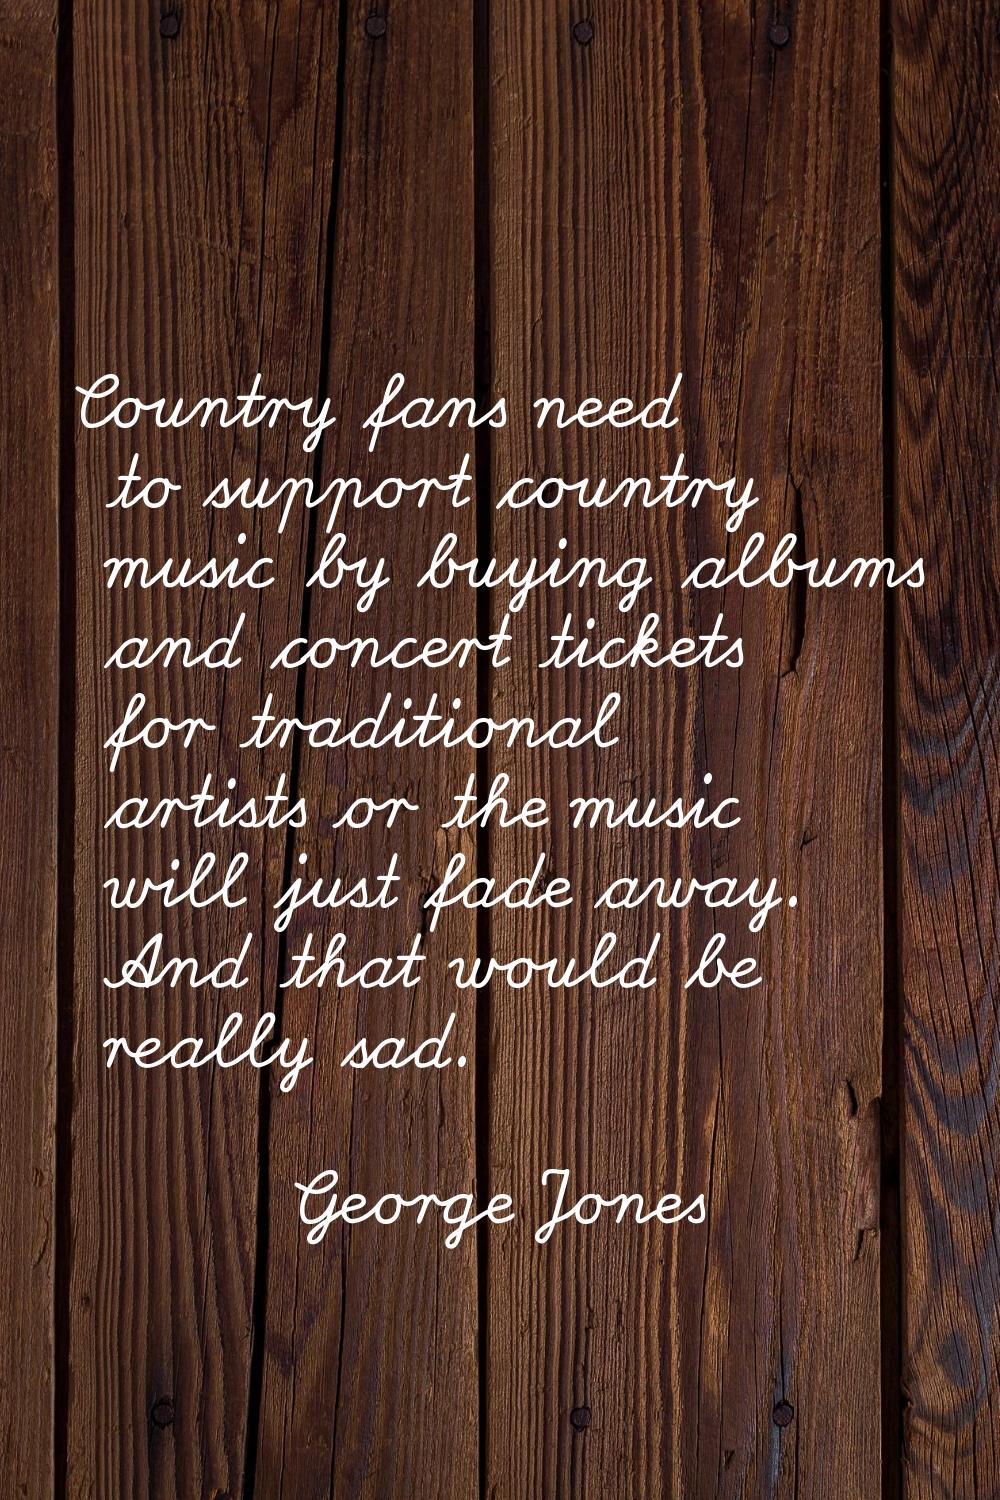 Country fans need to support country music by buying albums and concert tickets for traditional art